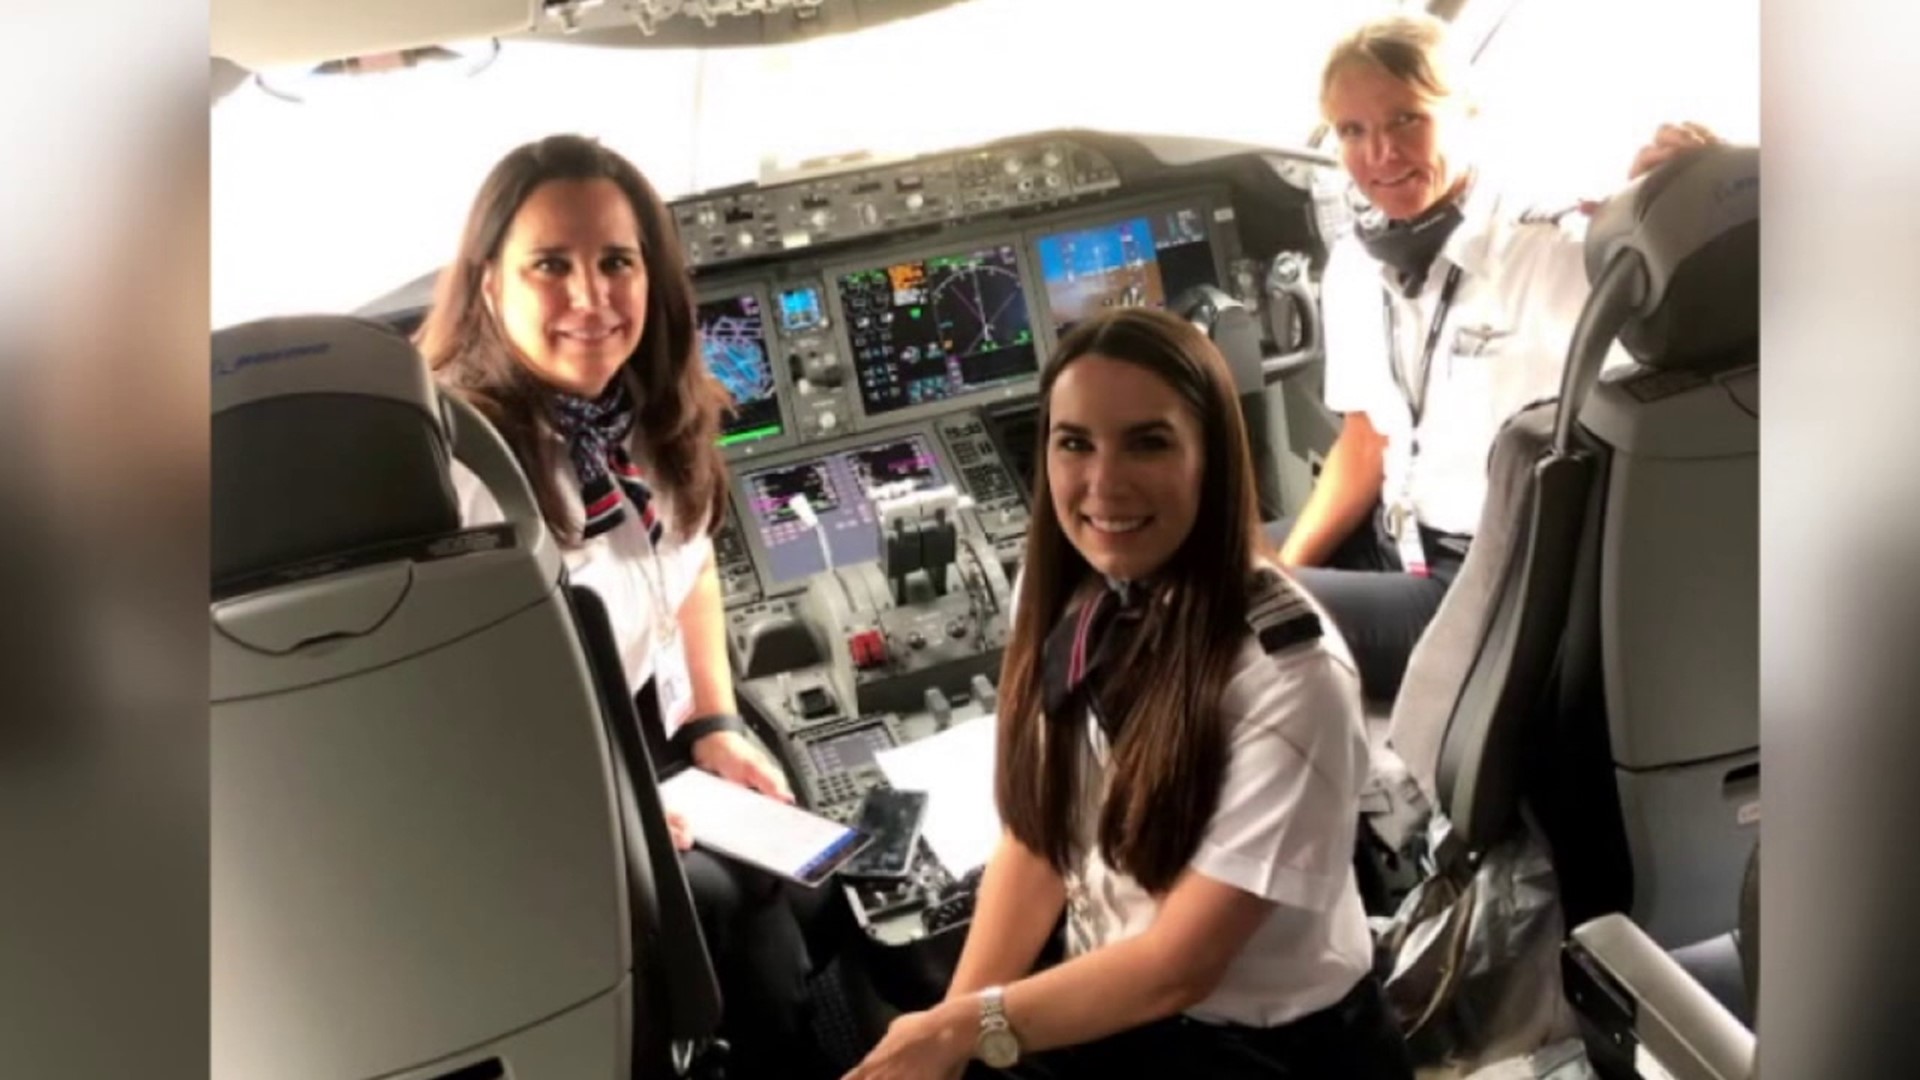 Females in the aviation industry from our area want to inspire the next generation of pilots.